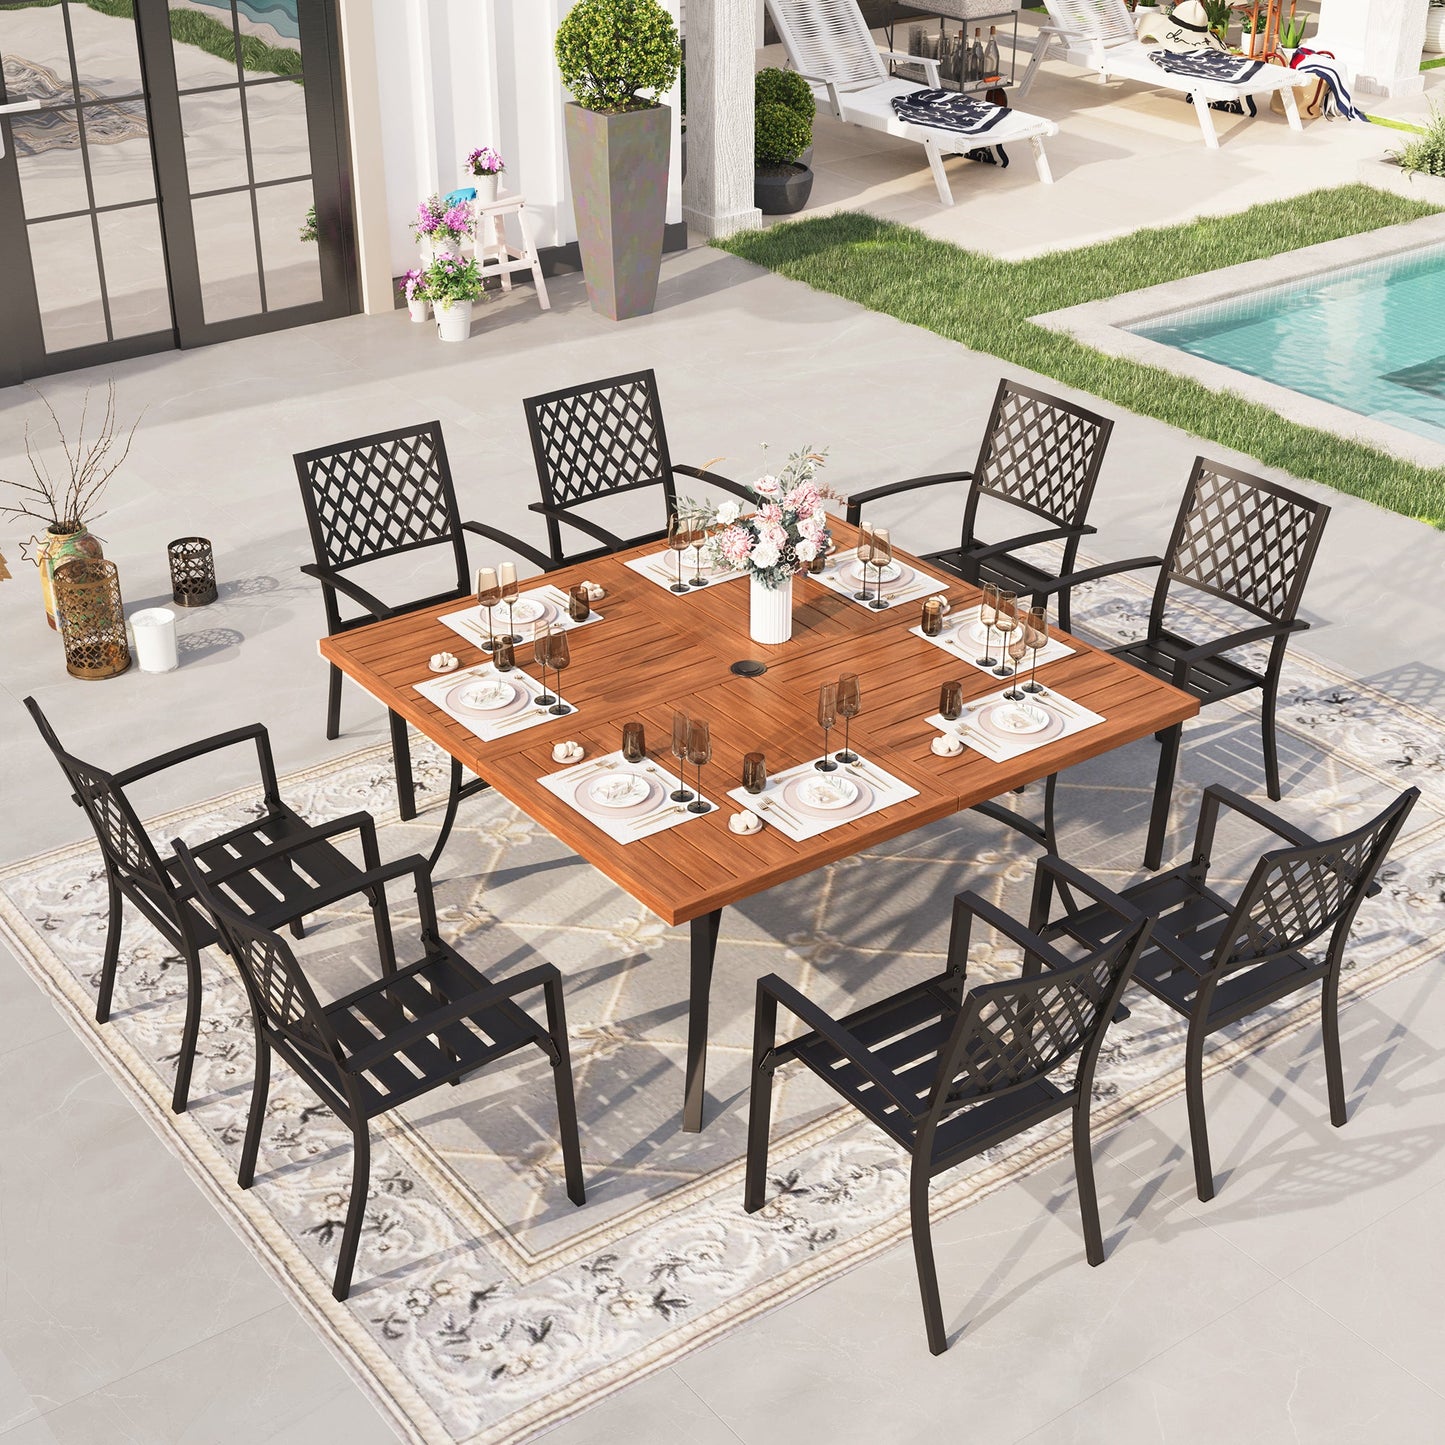 Sophia & William 9 Piece Outdoor Metal Patio Dining Set 60 Teak Wood Square Table and Chairs Furniture Set for 8, Brown